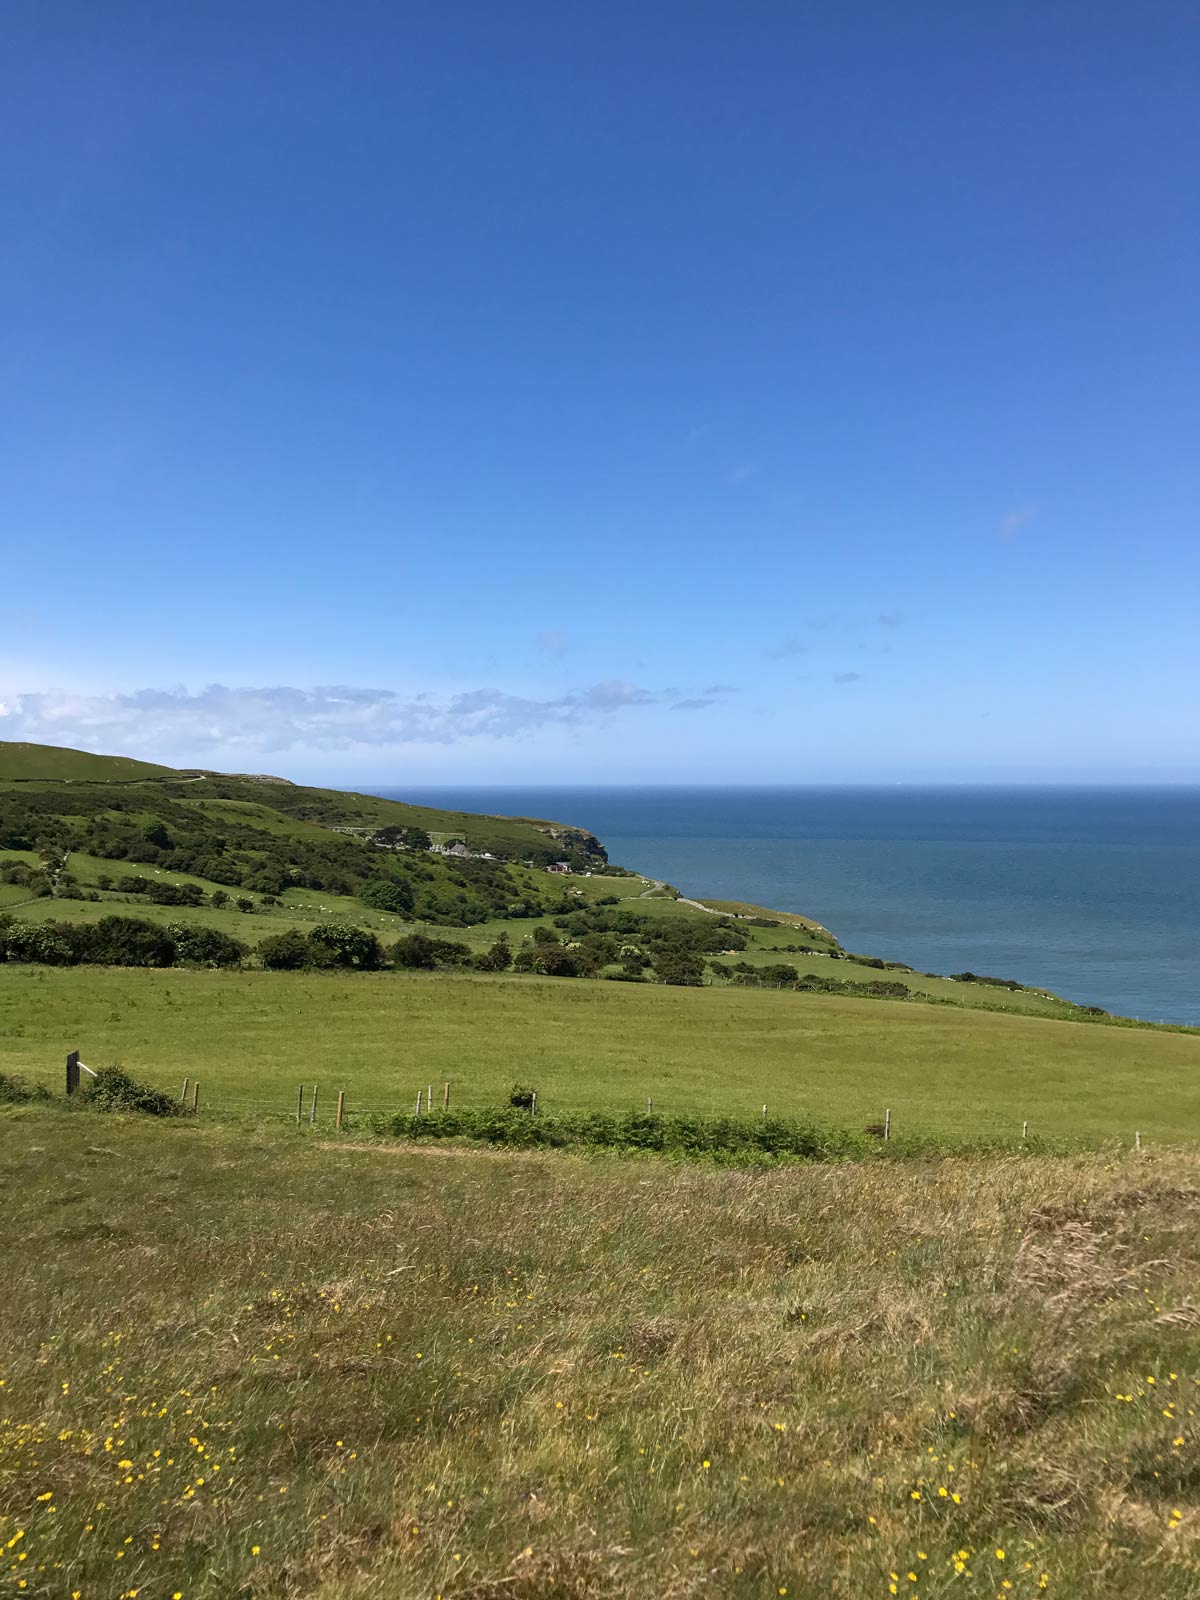 ocean view from a grassy knoll in wales.